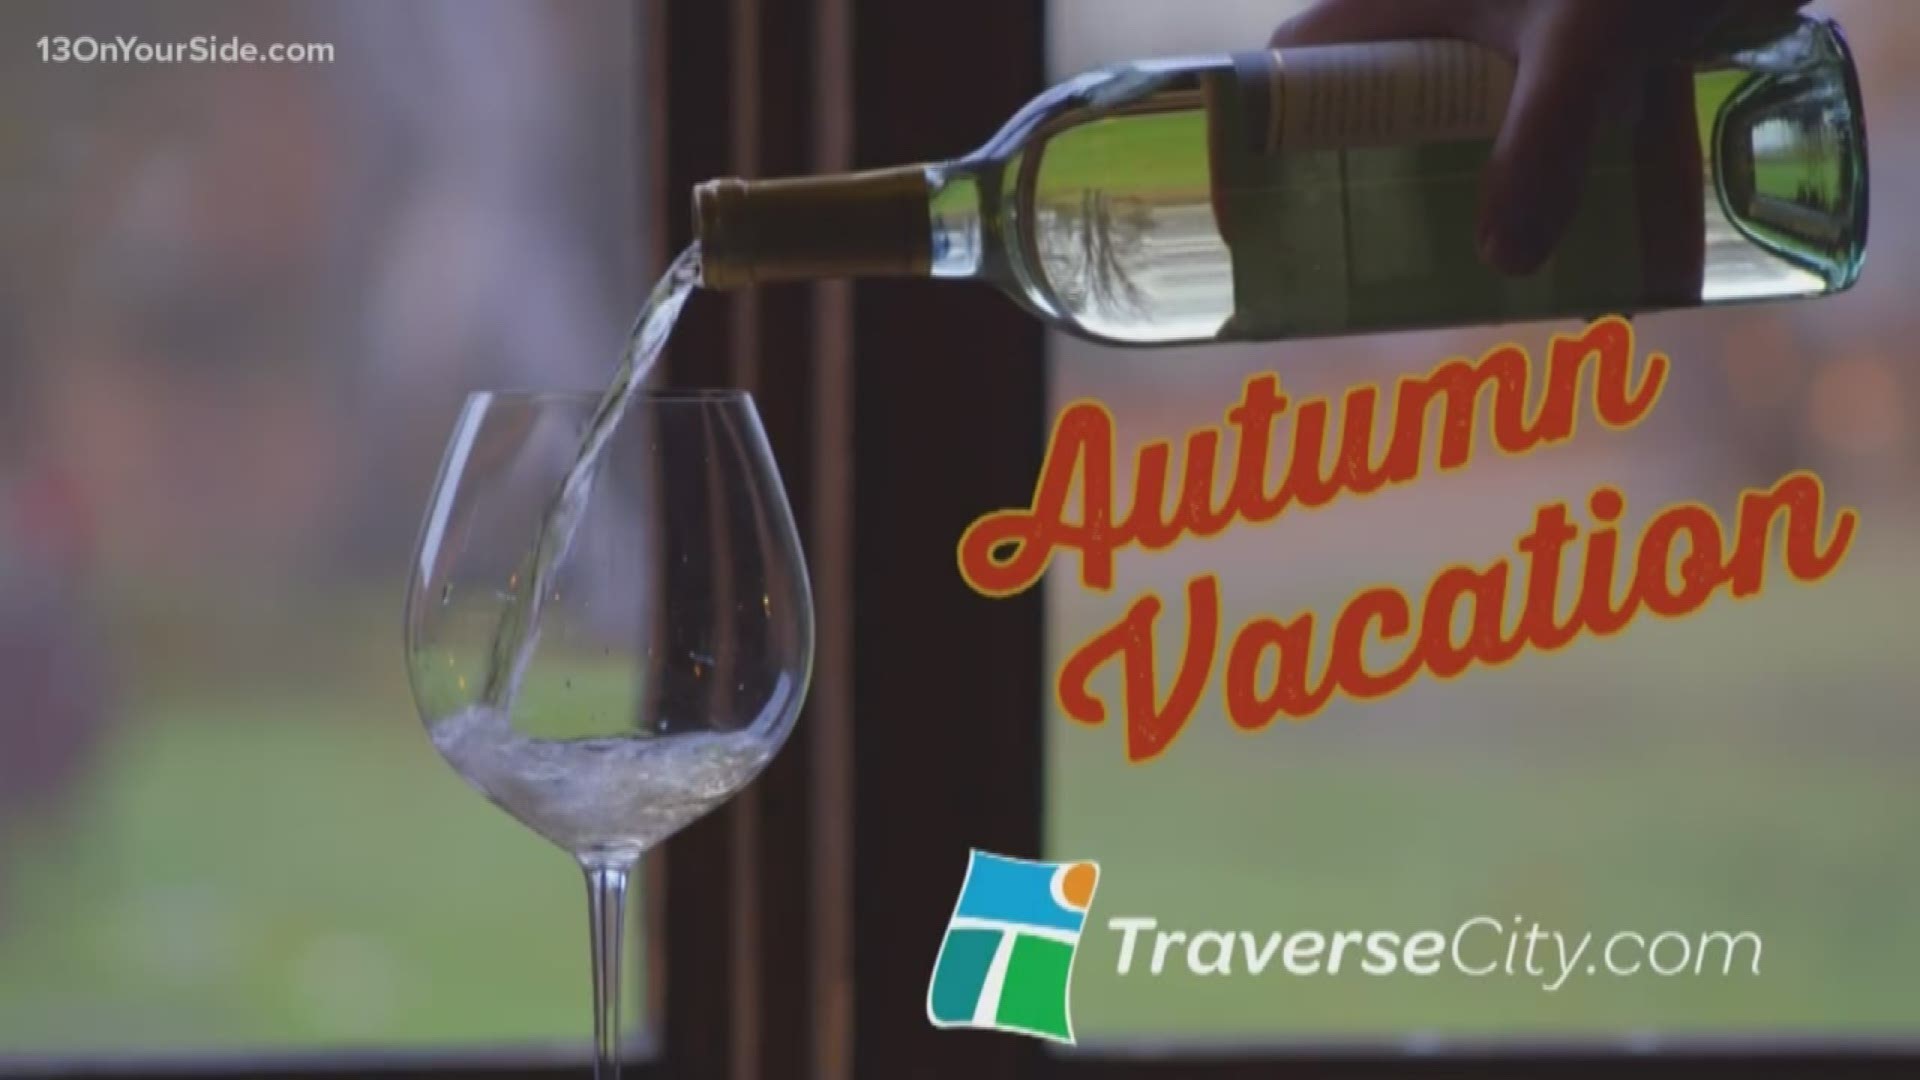 With Labor Day behind us this is the perfect time to travel at affordable prices. In Traverse City, this time of year means fab fall specials including discounts on lodging, entertainment, activities and dining.